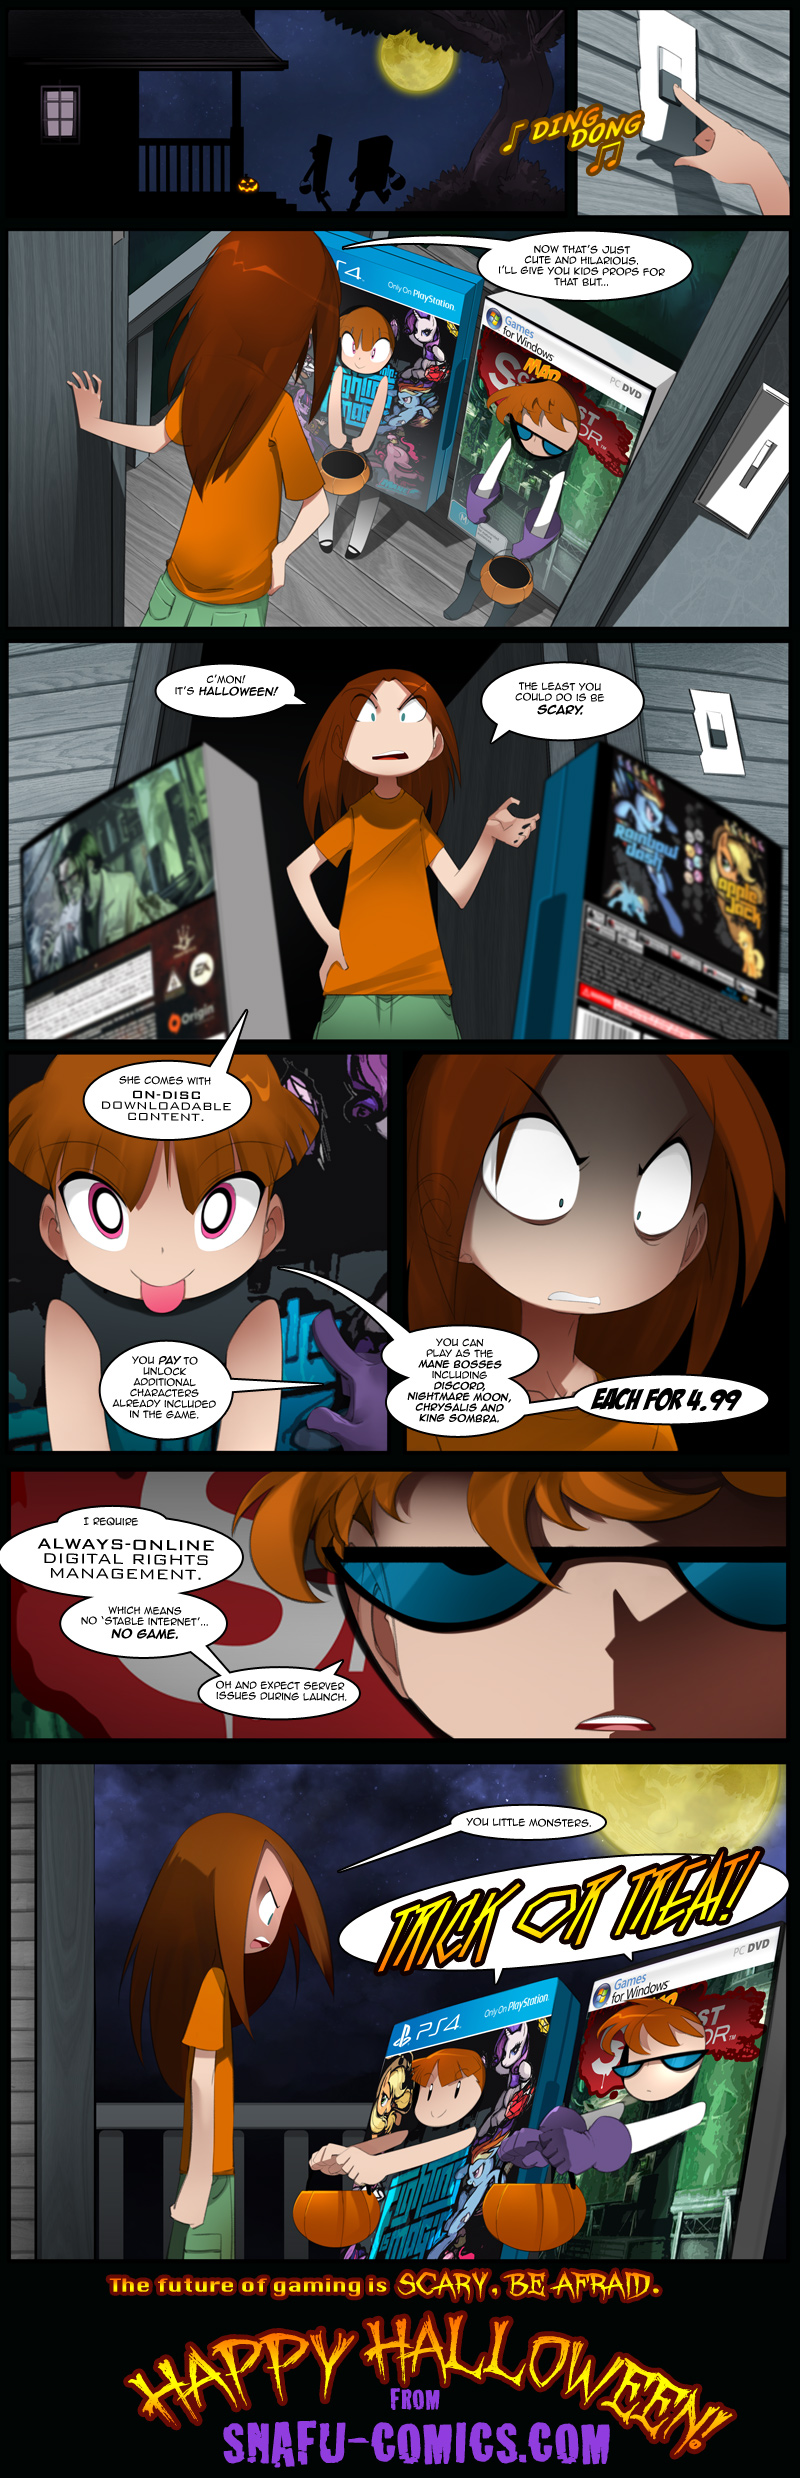 The Red Dragons 2 - Page 11 Halloween_2015-copy